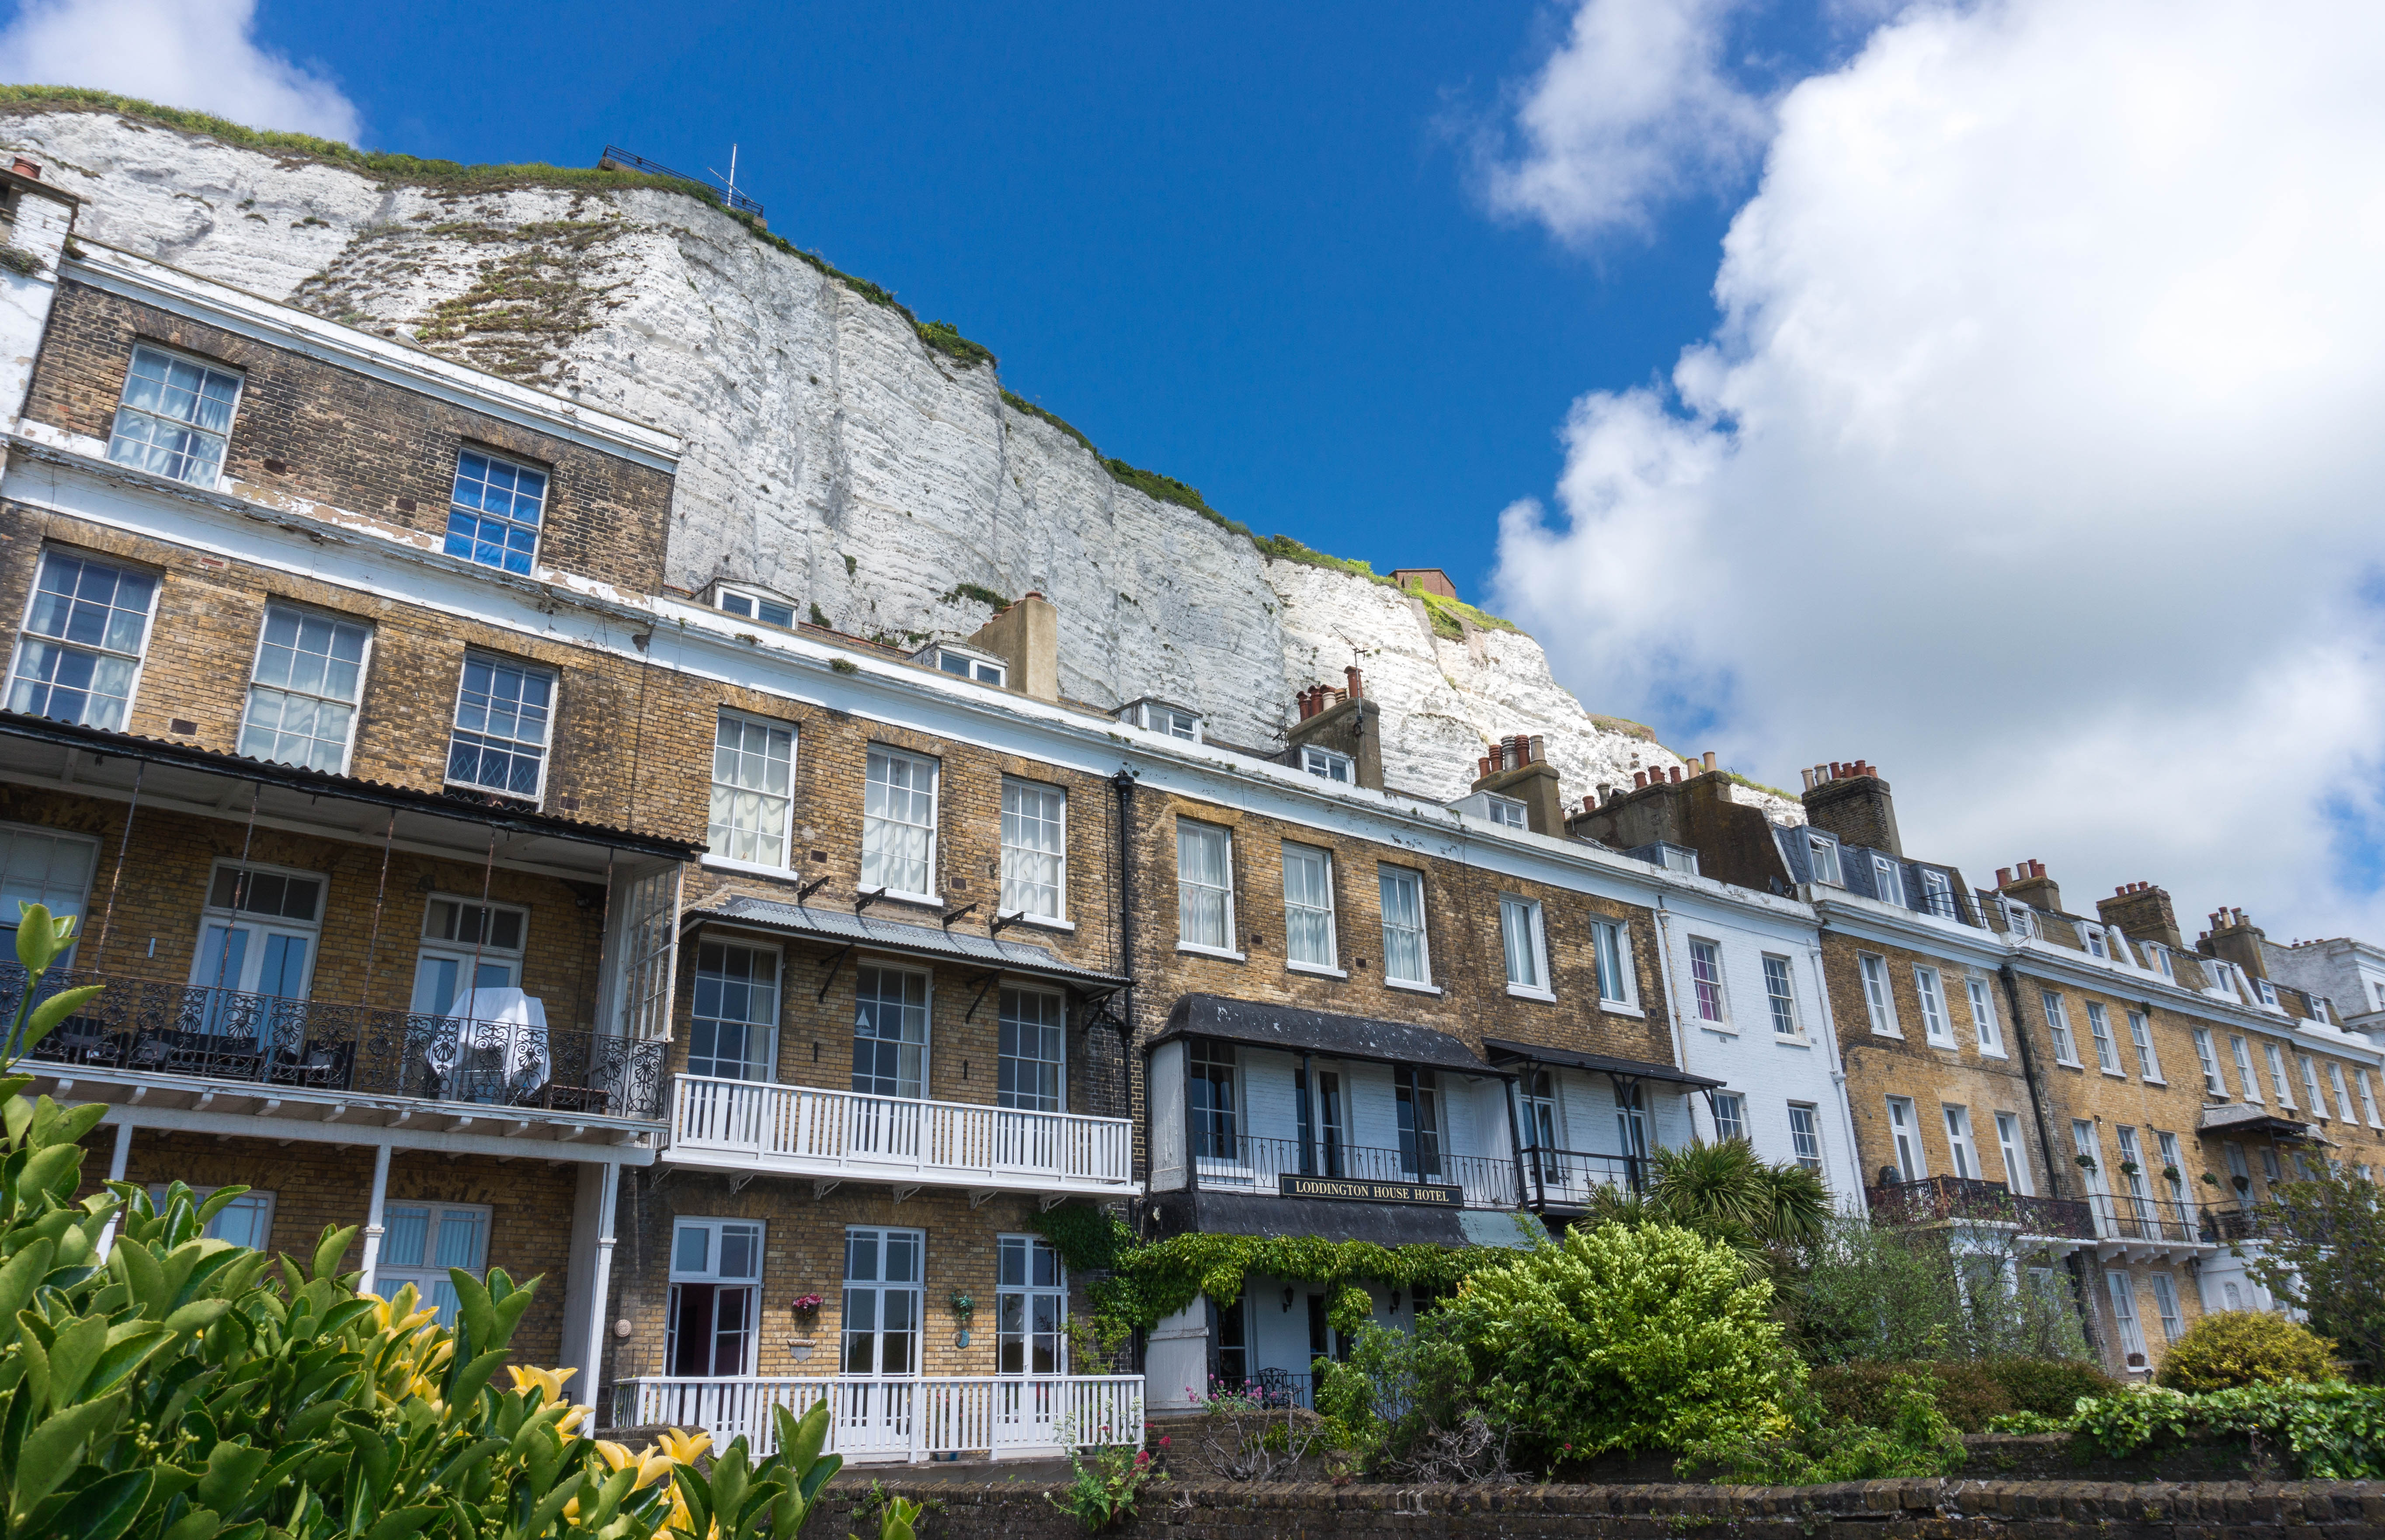 Canterbury to Dover | Terraced houses with white cliffs as neighbours on Via Francigena